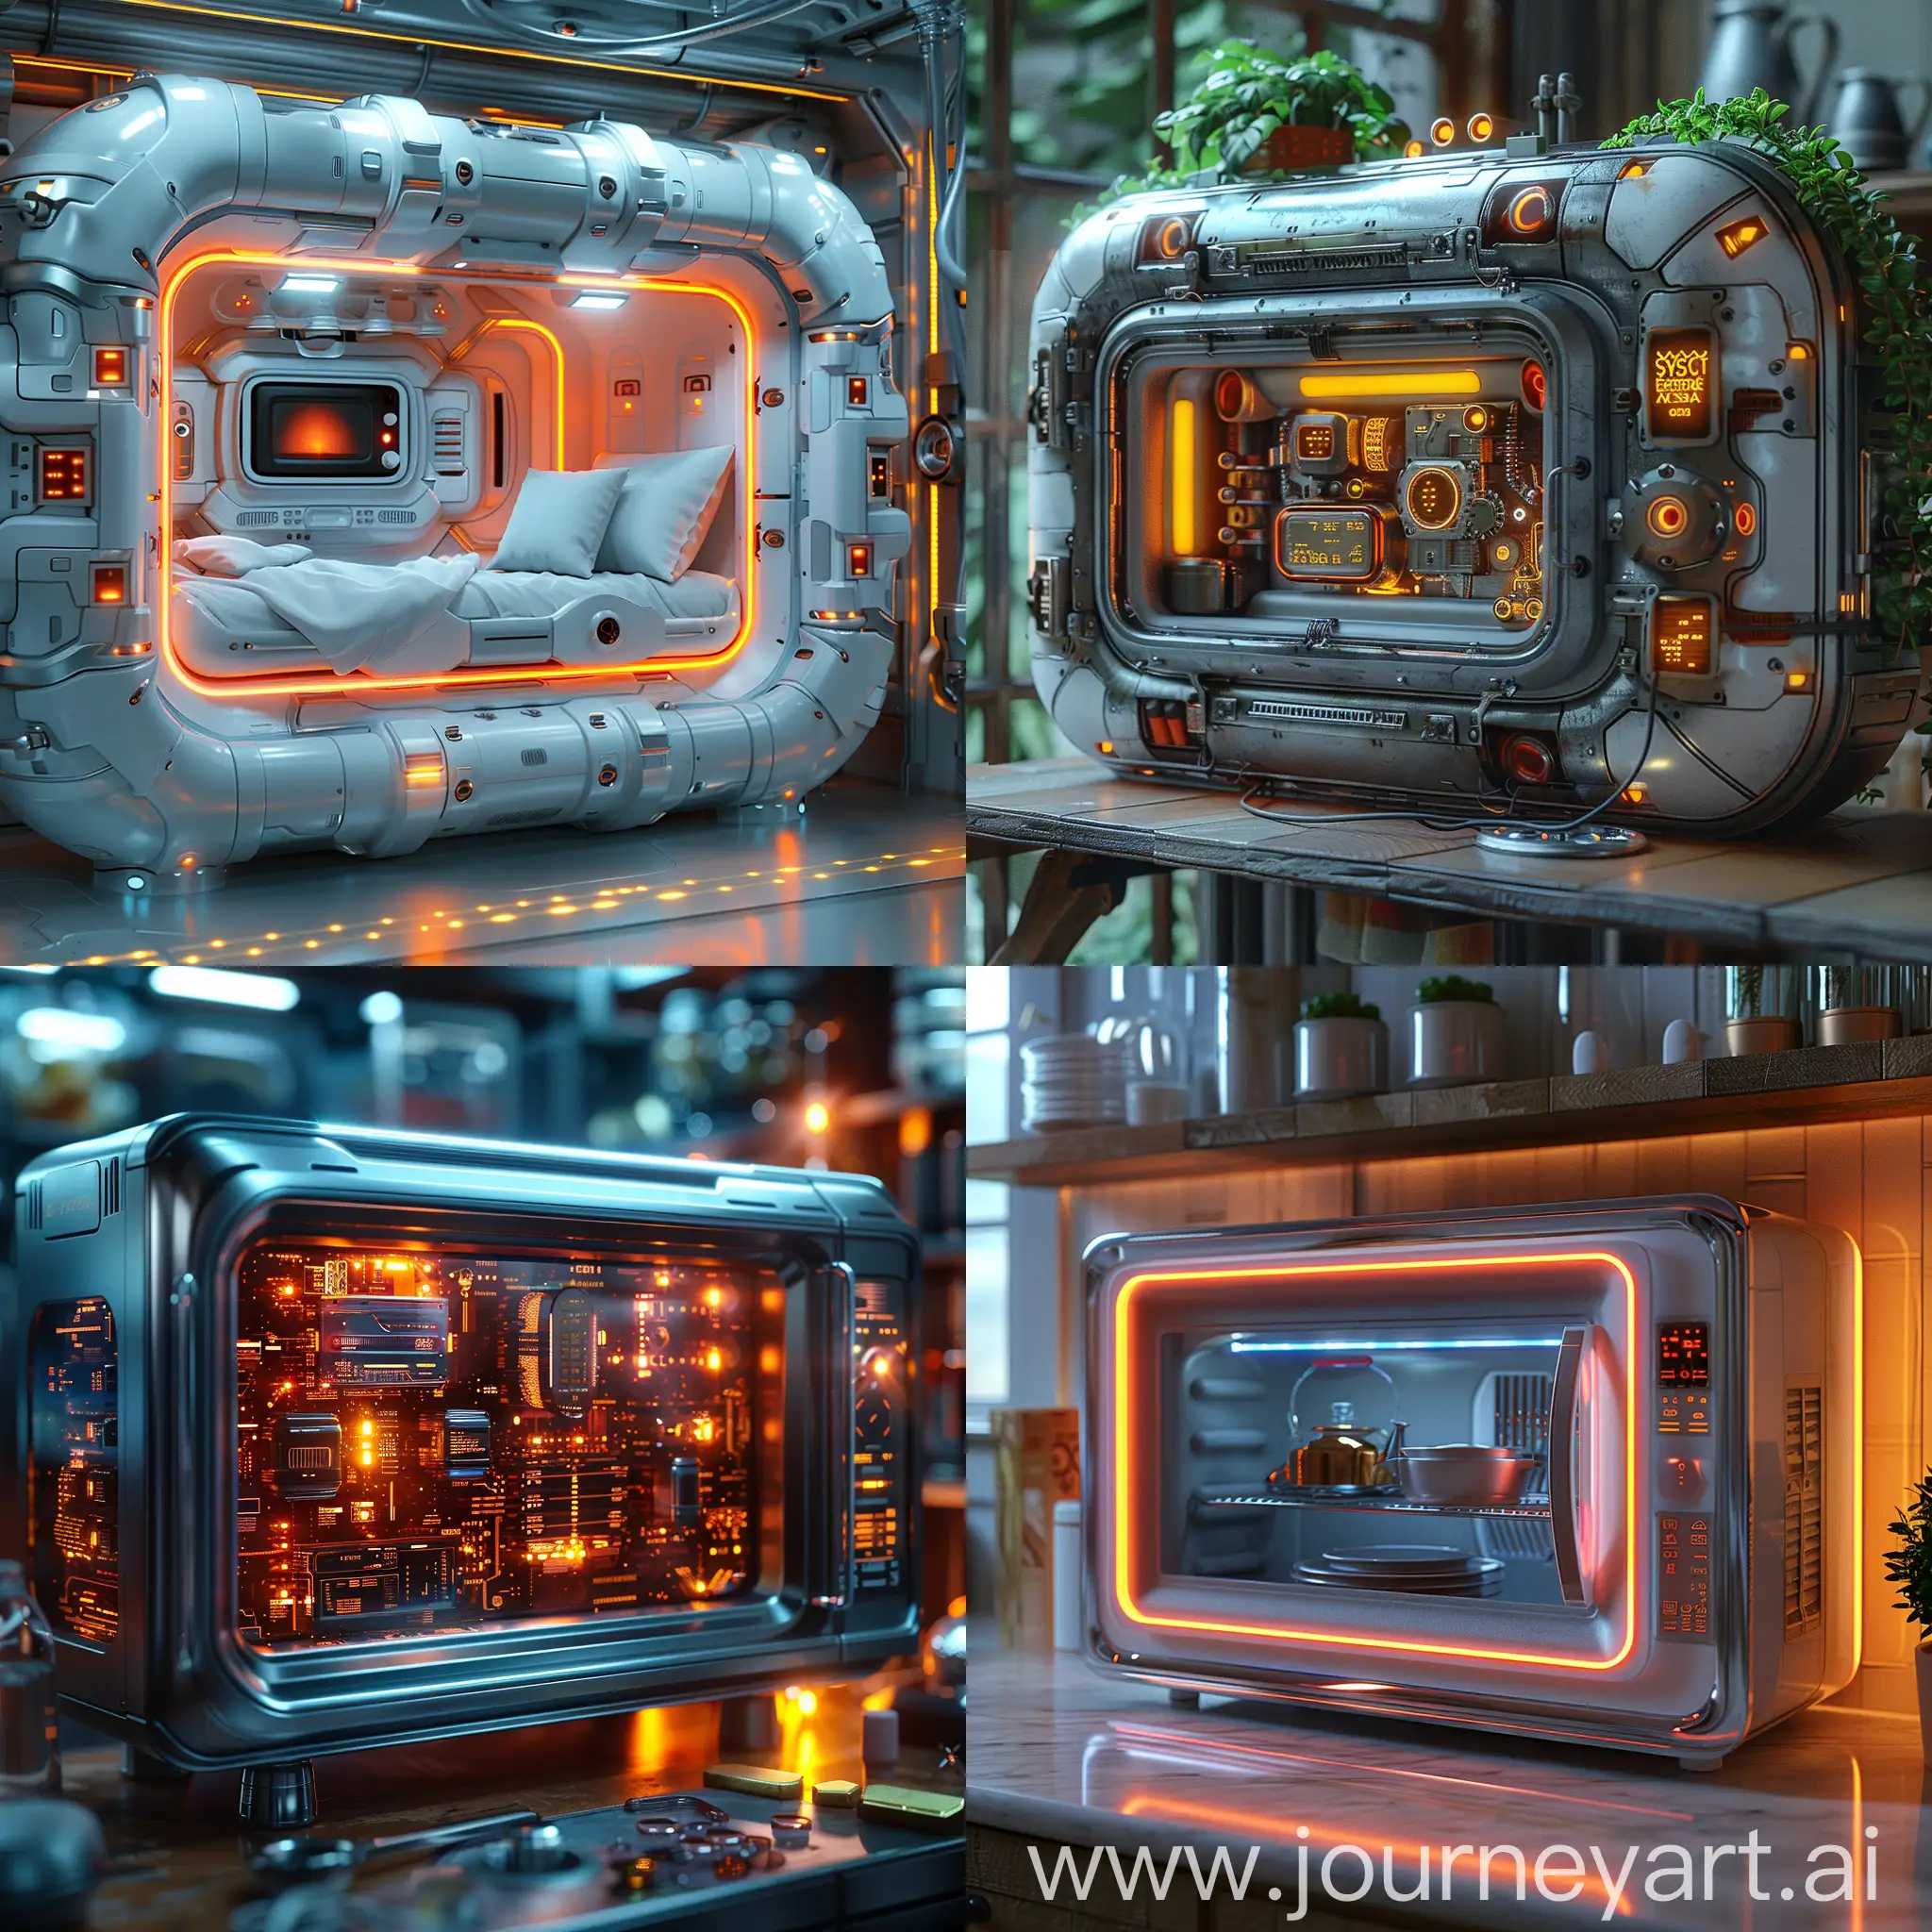 Futuristic-Microwave-Technology-Rendering